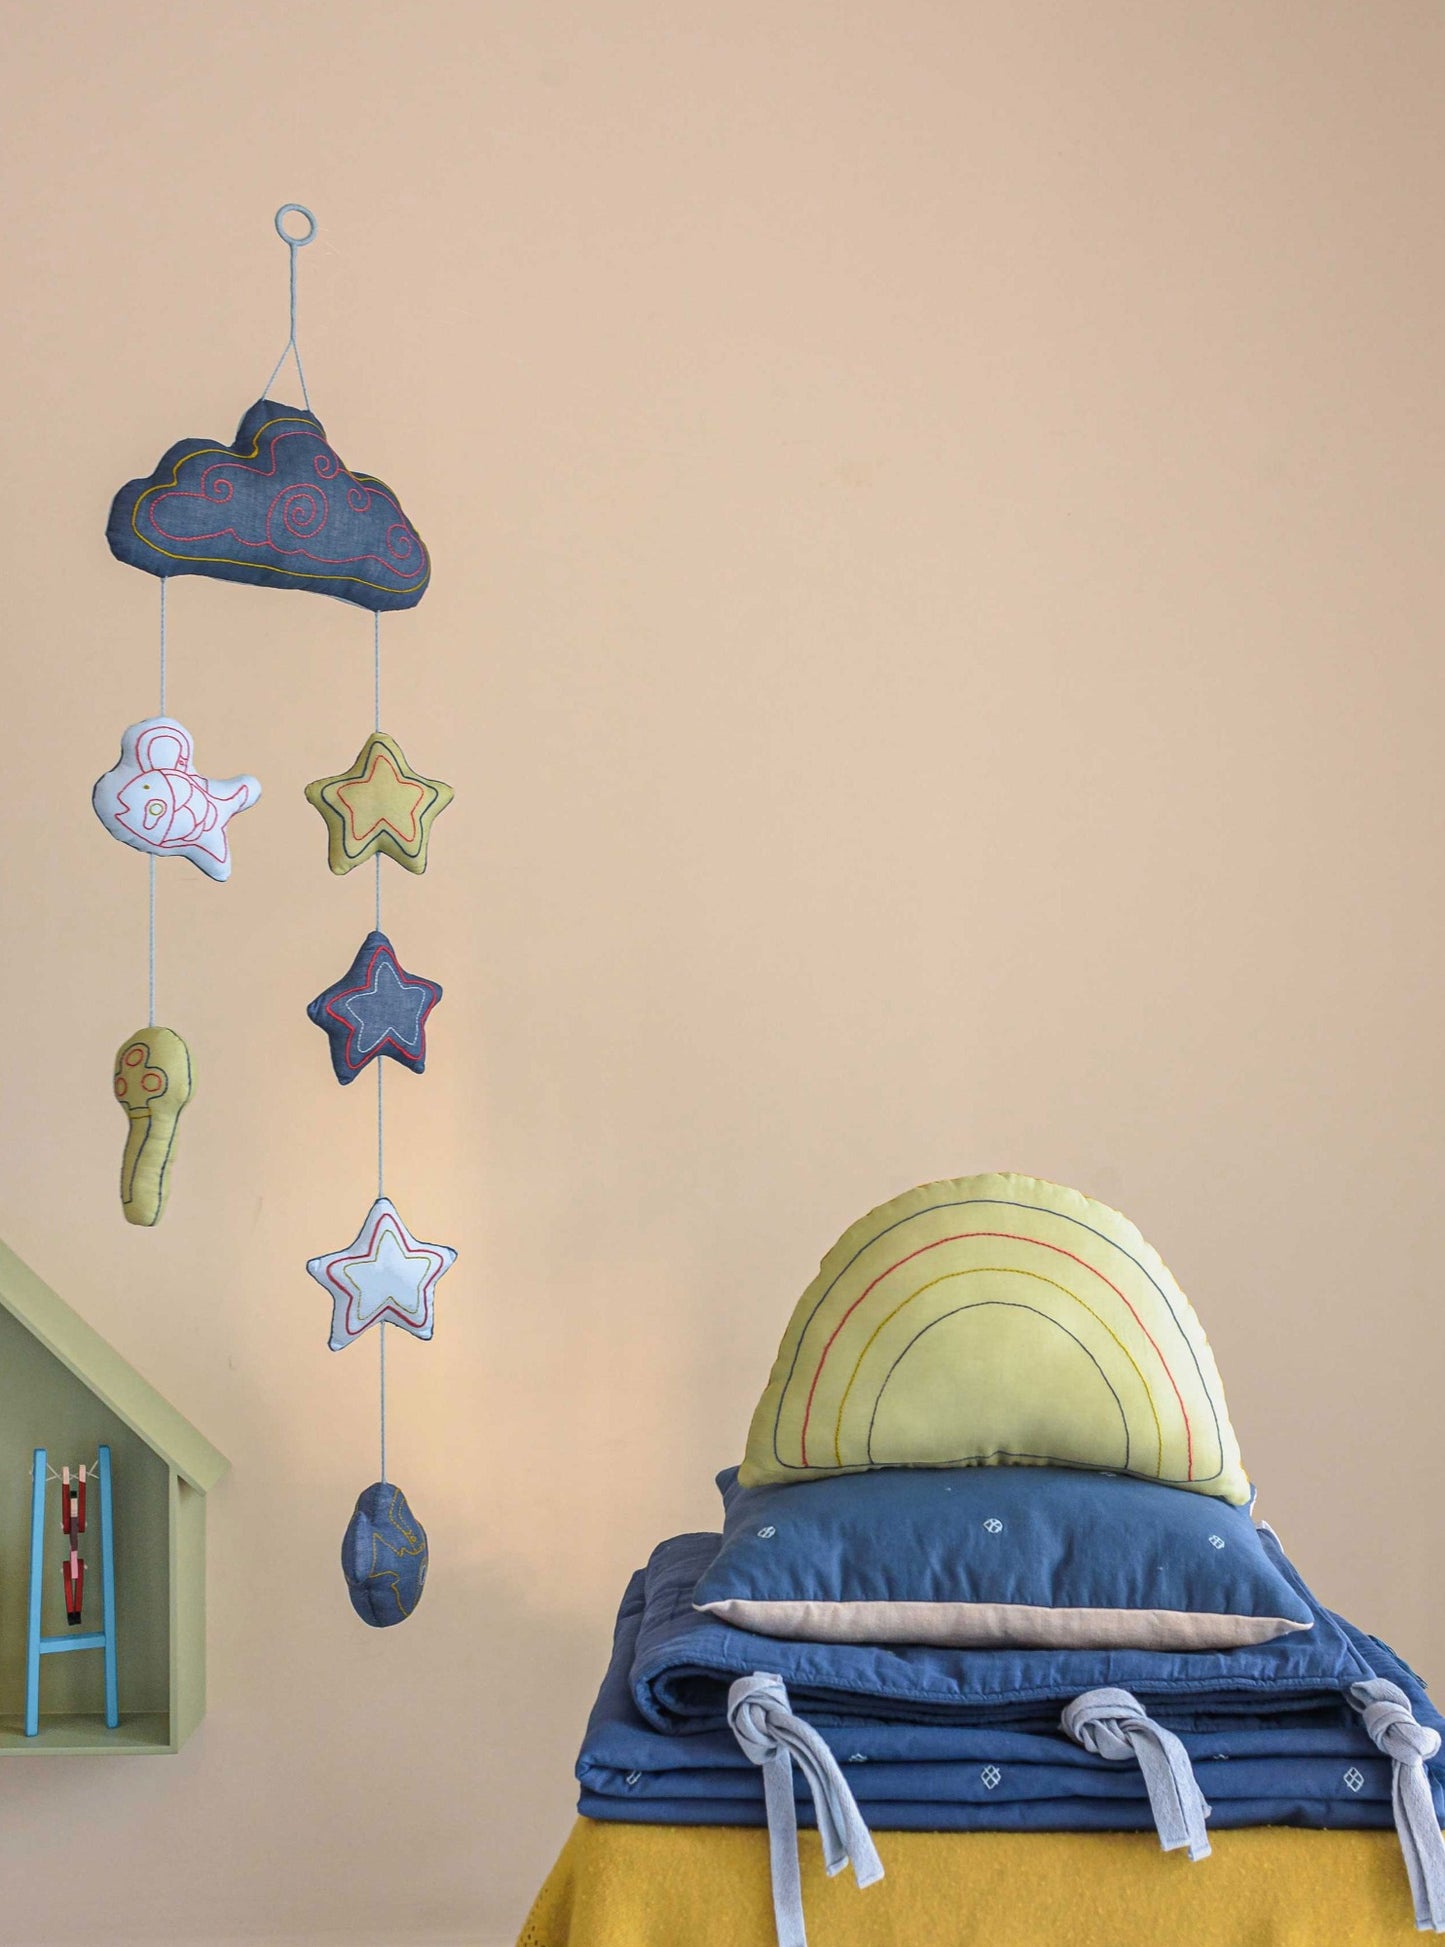 Blue bandook pillow, blanket, bumper with Lime rainbow decorative cushion stacked on top of each other while blue Moshkel gosha mobile is hanging from the ceiling 